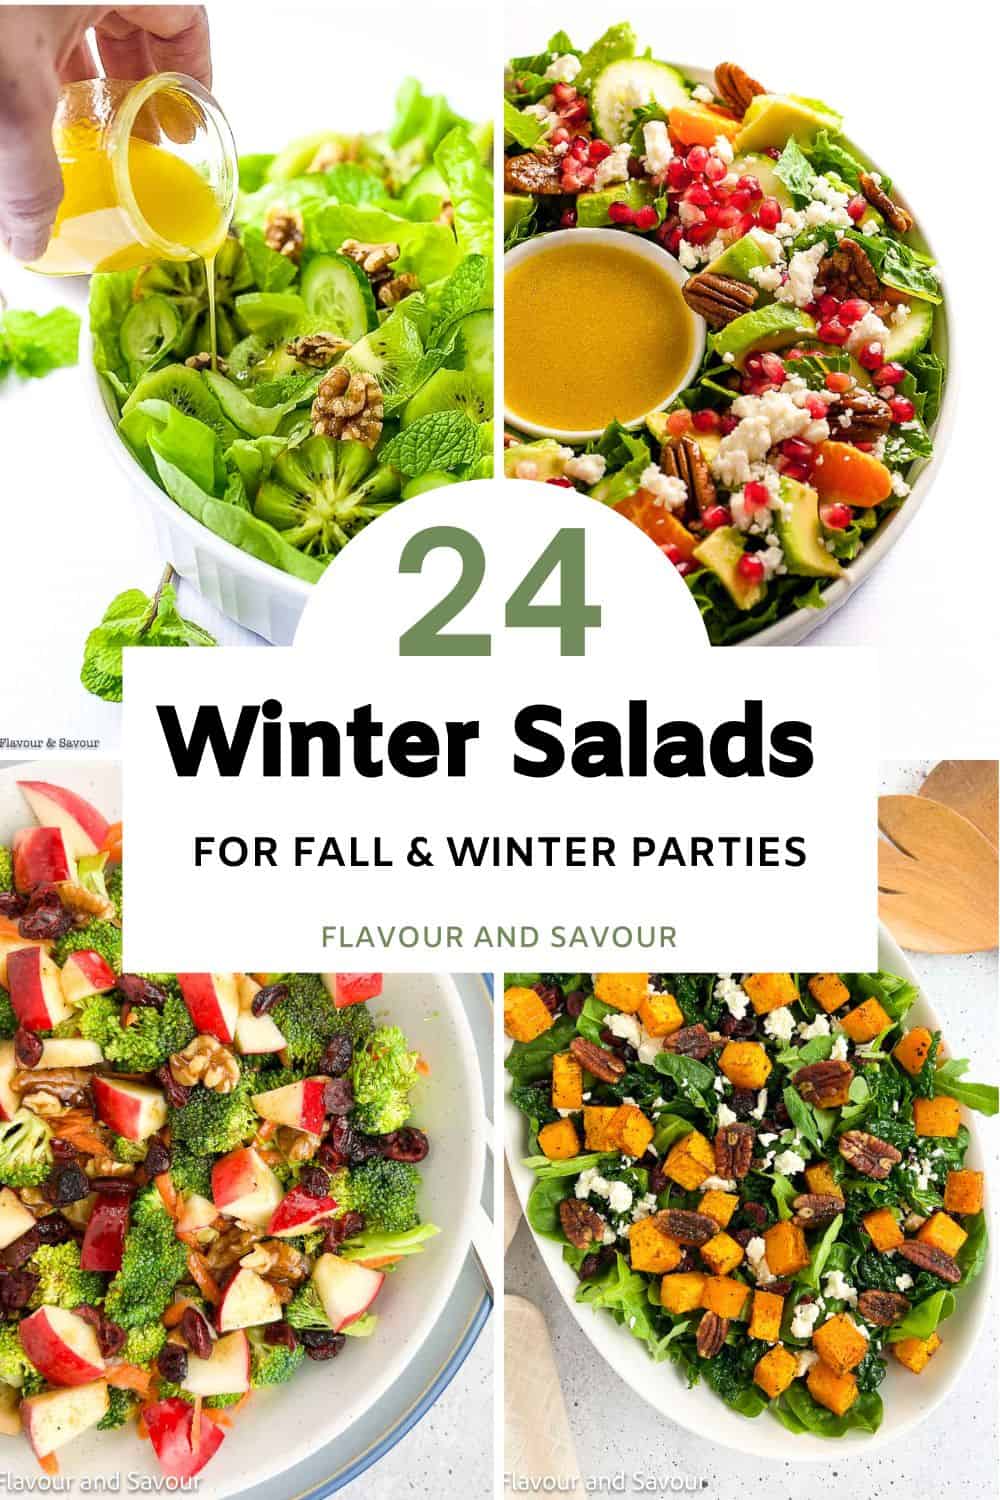 A collage of images with text overlay for 24 winter salads for fall and winter parties.